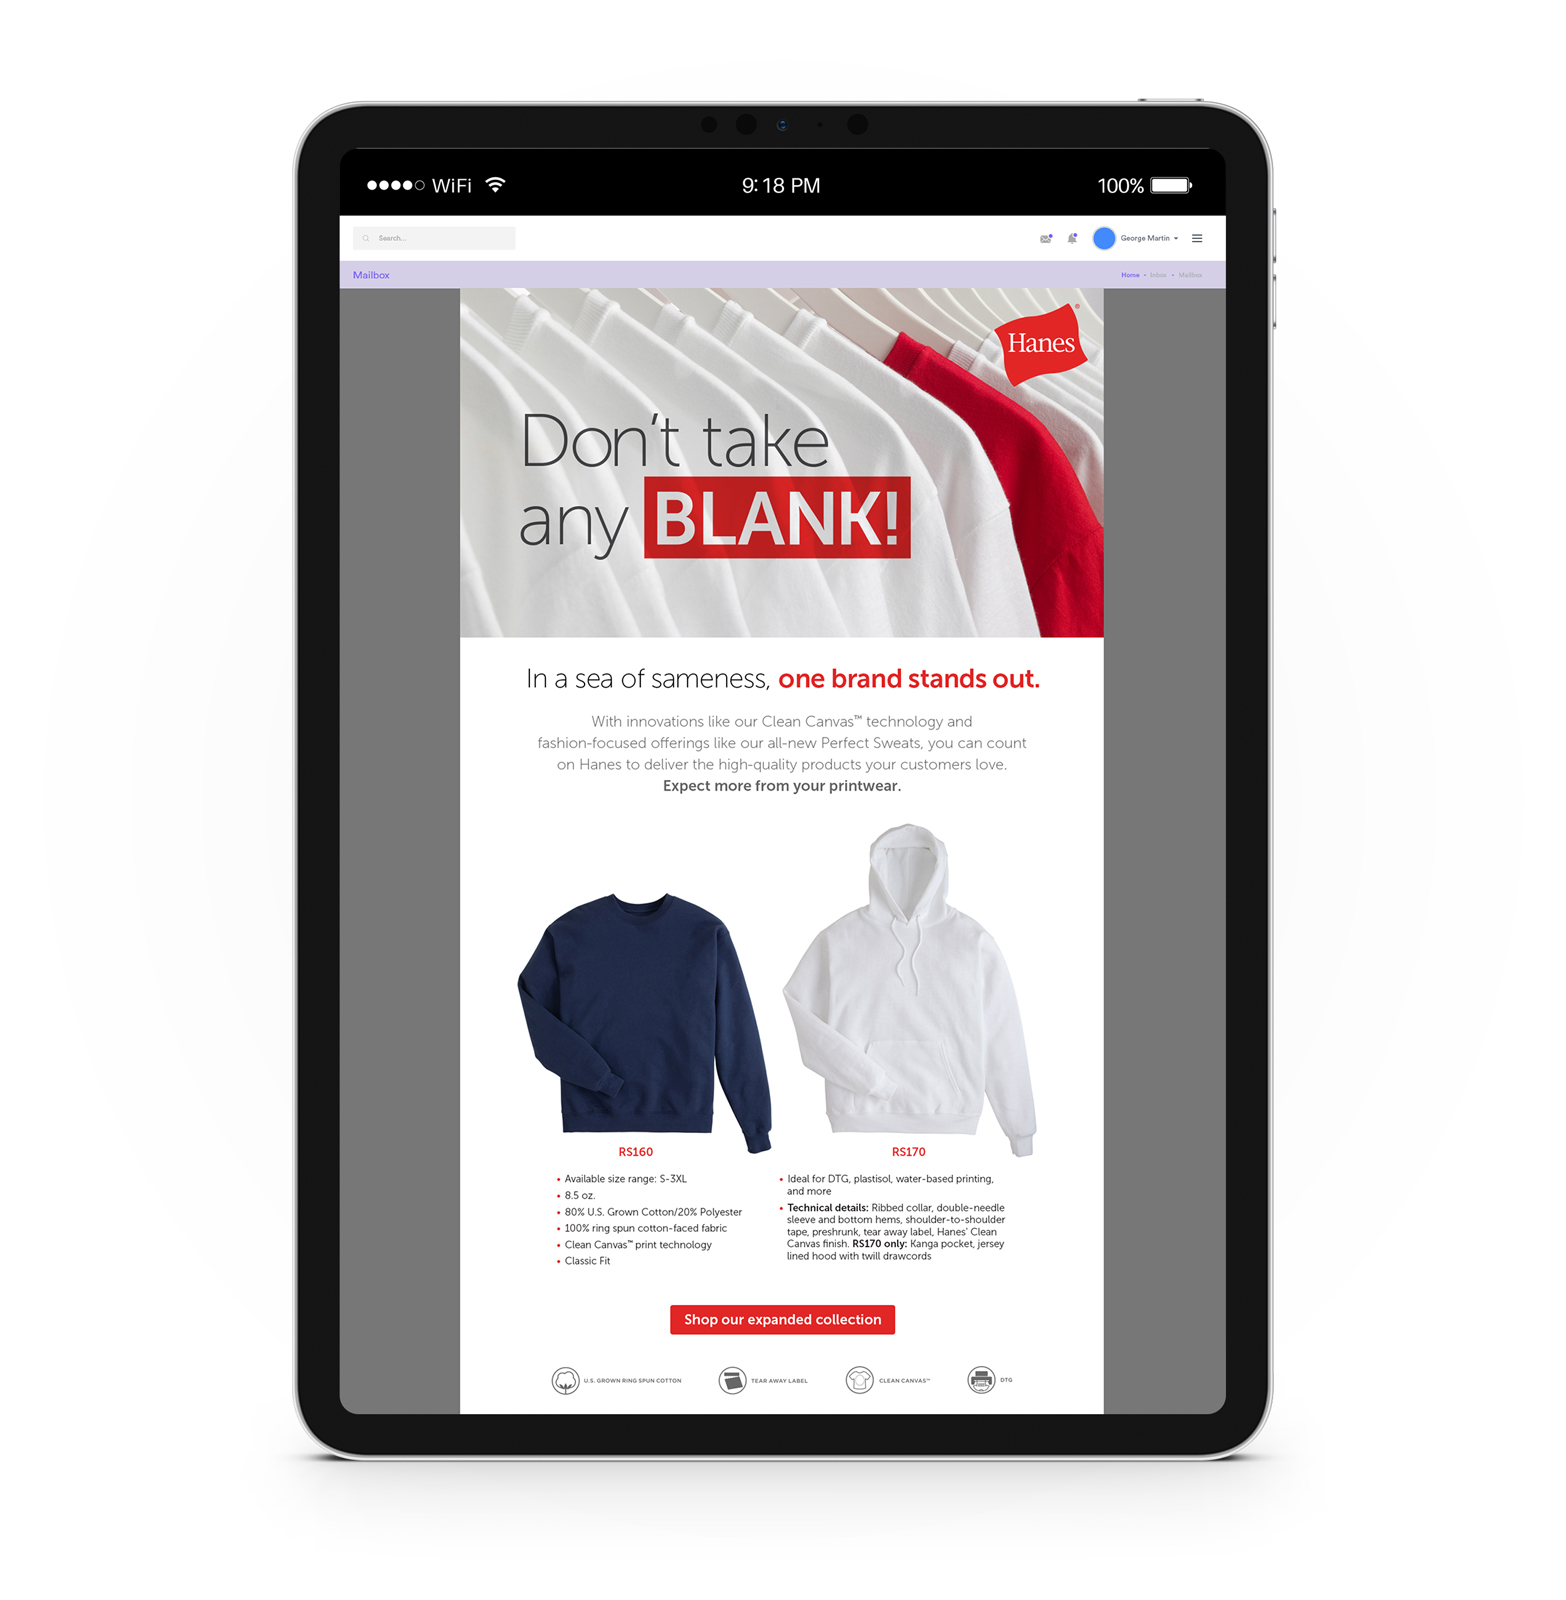 Hanes - Don’t take any blank campaign email